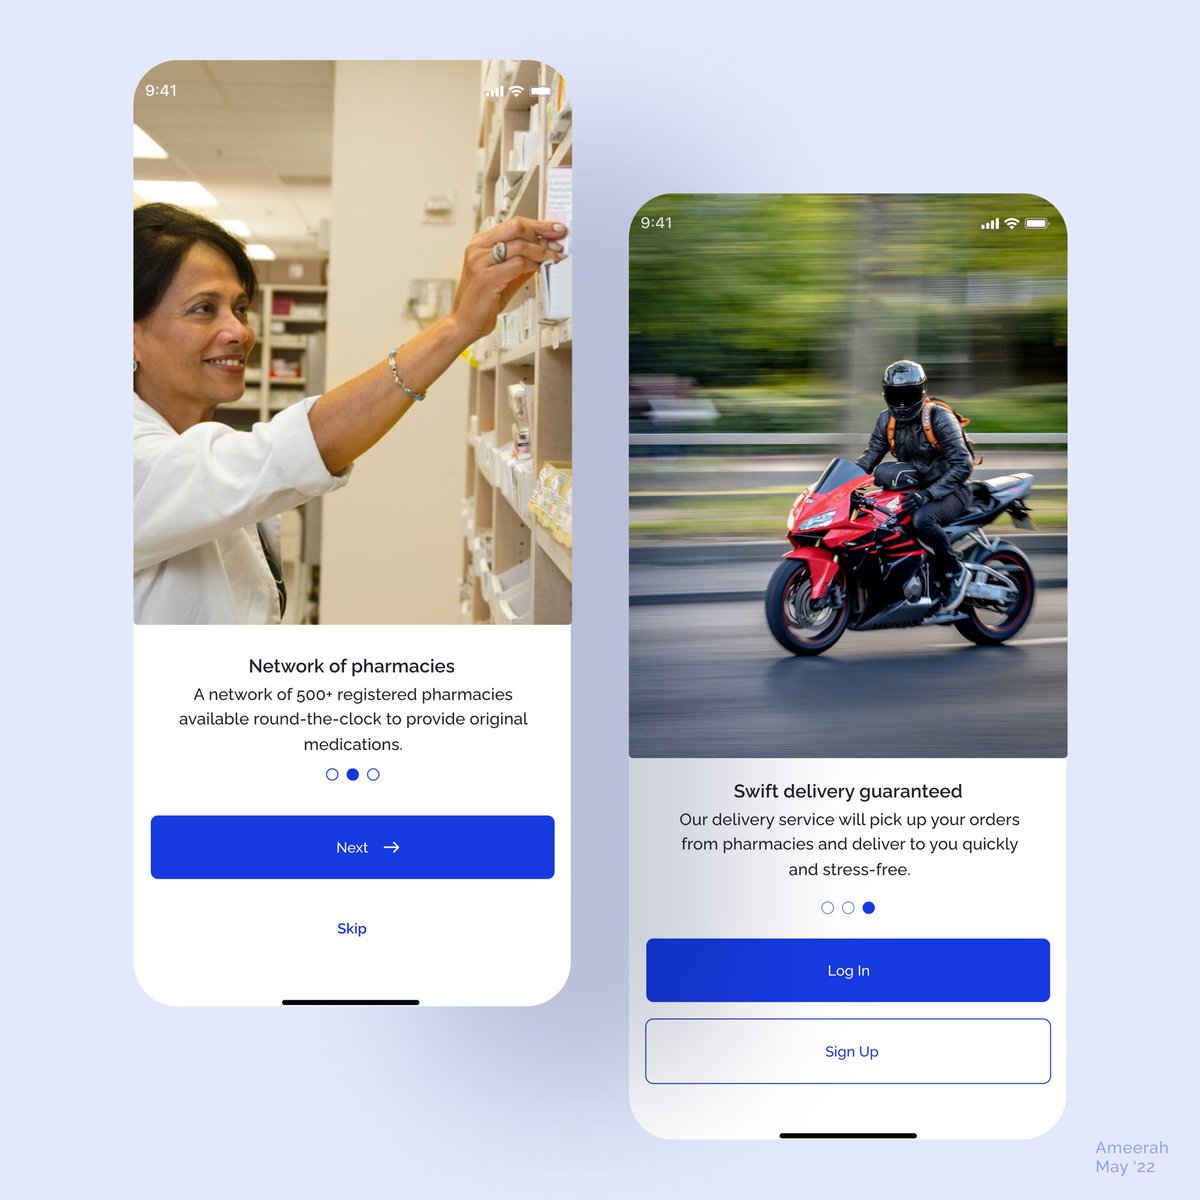 Day 1 of #30daysUIChallenge
Splash & onboarding screens for a medicine purchase and delivery mobile app.